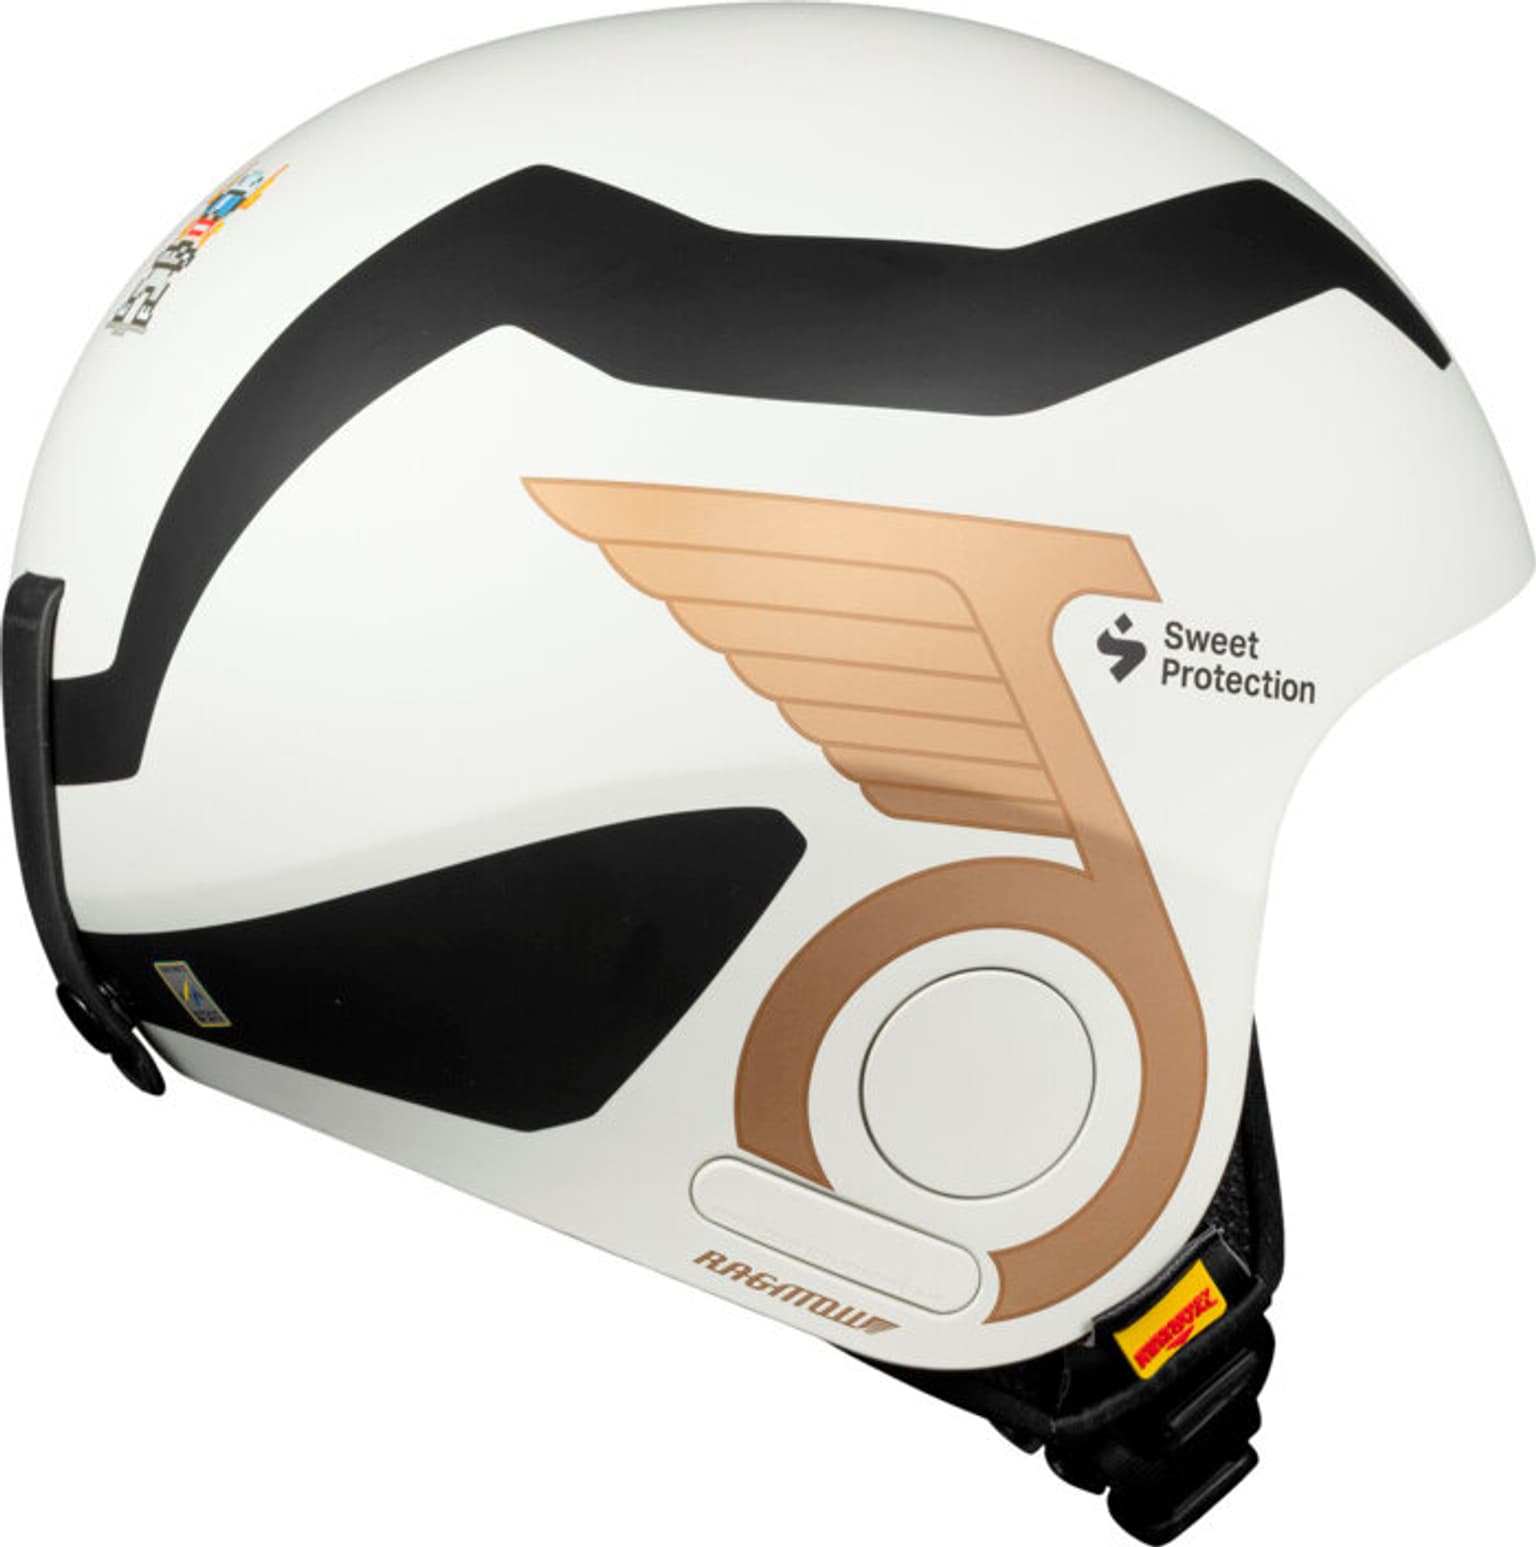 Sweet Protection Sweet Protection Volata 2Vi Mips Skihelm weiss 2